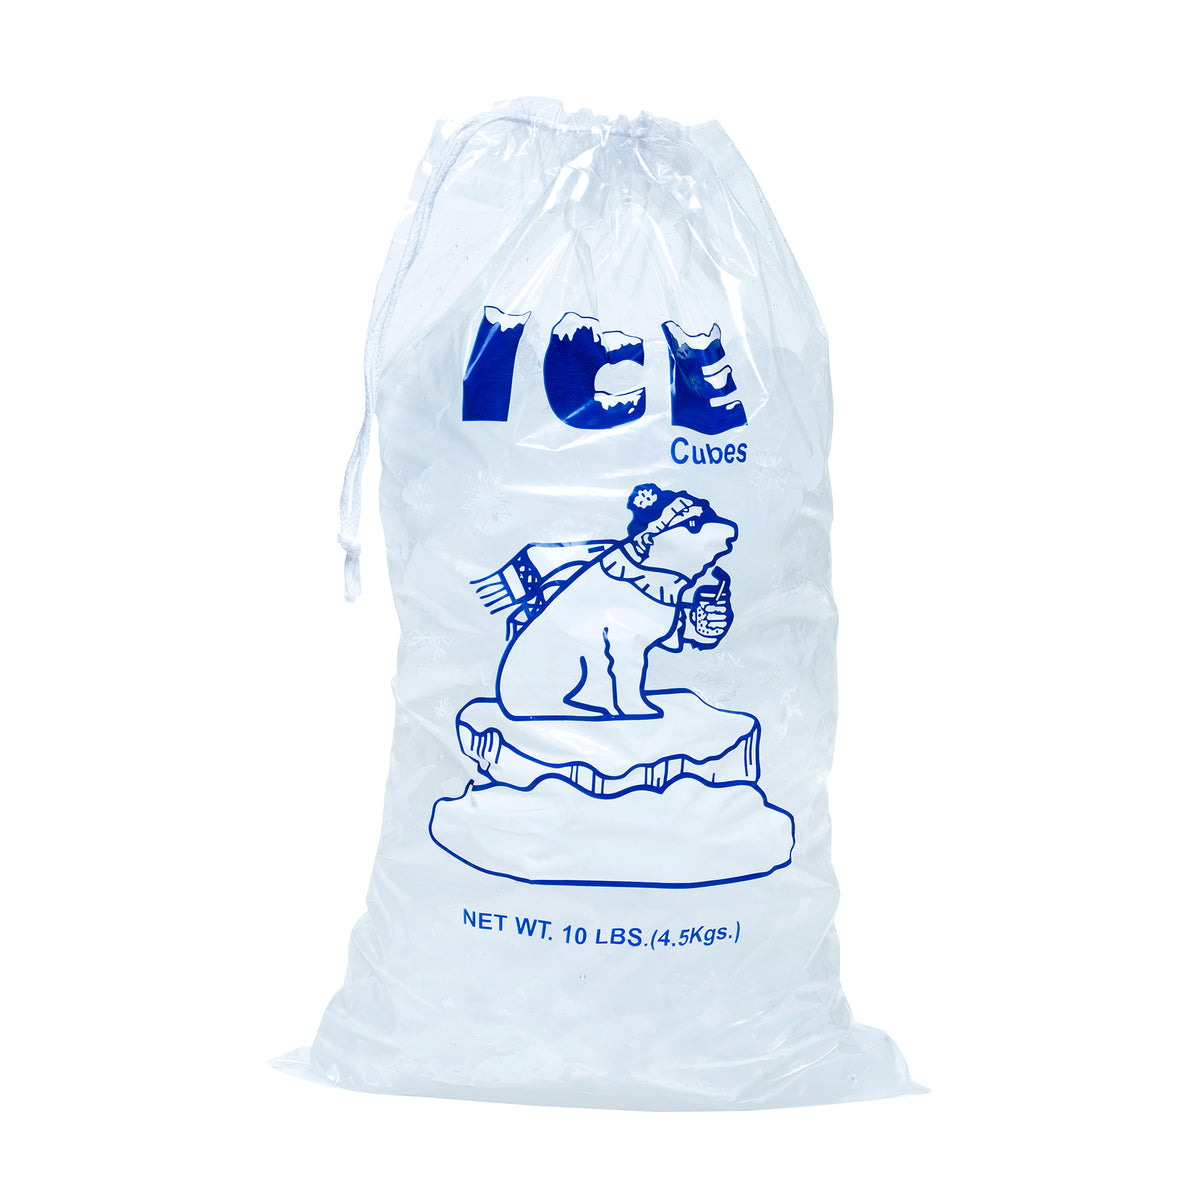 10 lbs ice bag with cotton drawstring